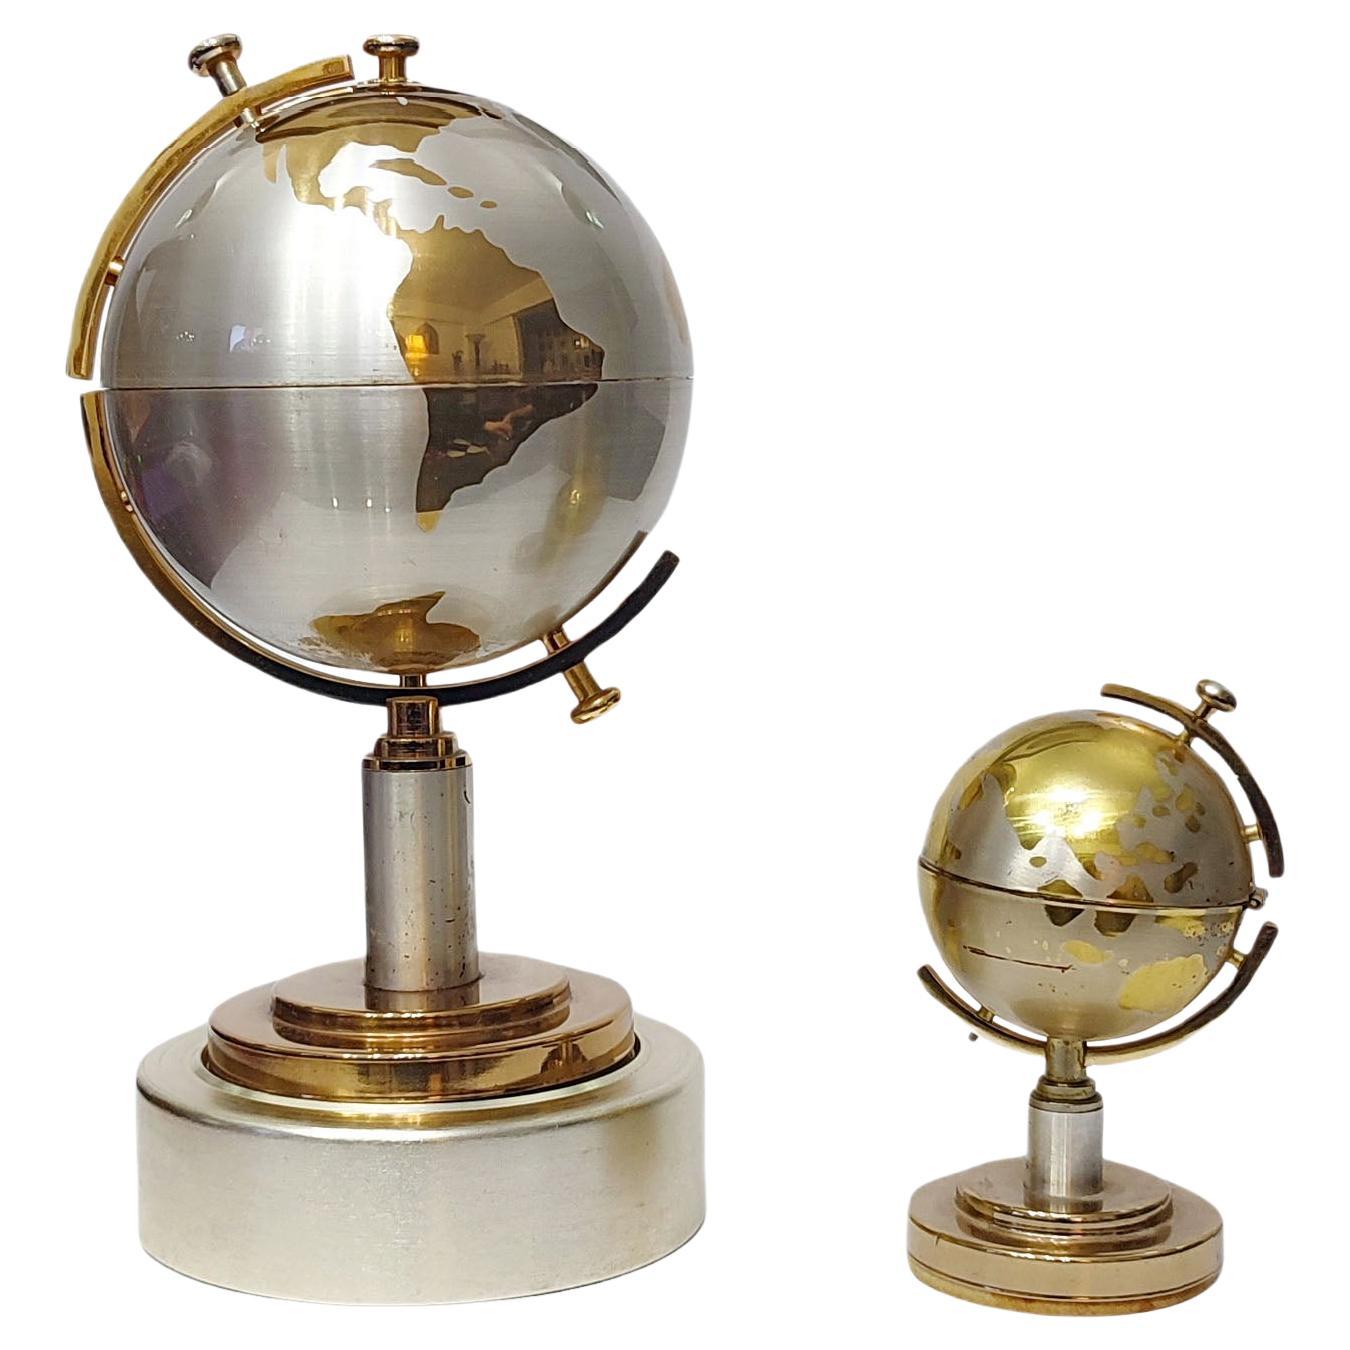 Cigarette Holder Musical World Globe and Globe Lighter, Brass, Germany, 1960s
Decorative tabletop cigarette holder and lighter, spherical form, the decor of the world globe map with polished brass against a satin silver background, cigarette